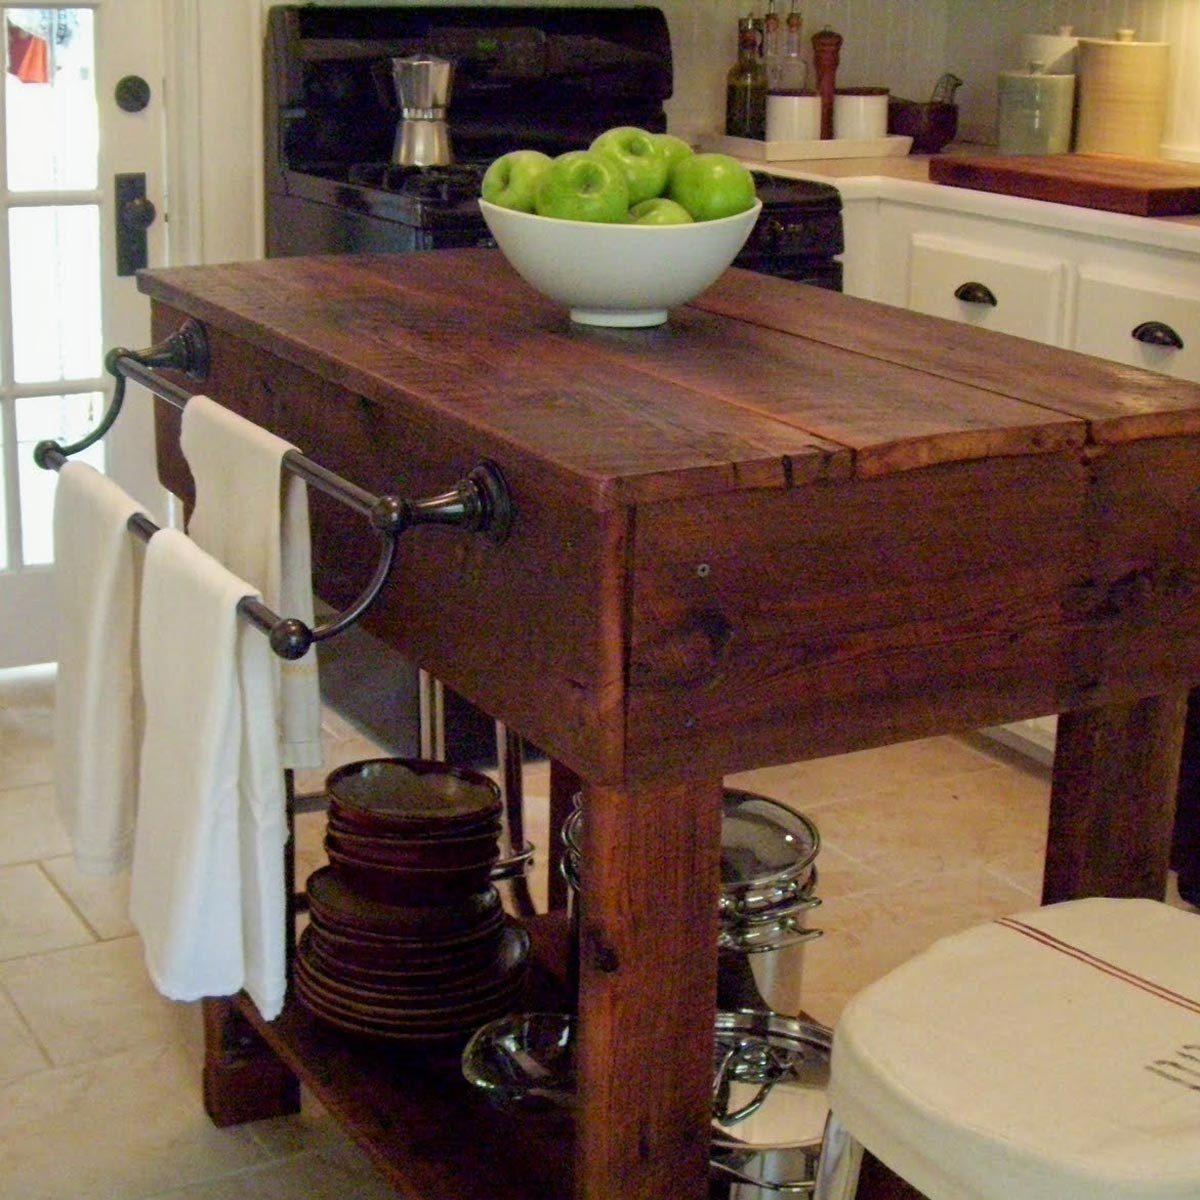 The 12 Best Diy Kitchen Islands The Family Handyman,Easy Diy Gifts For Friends Birthday